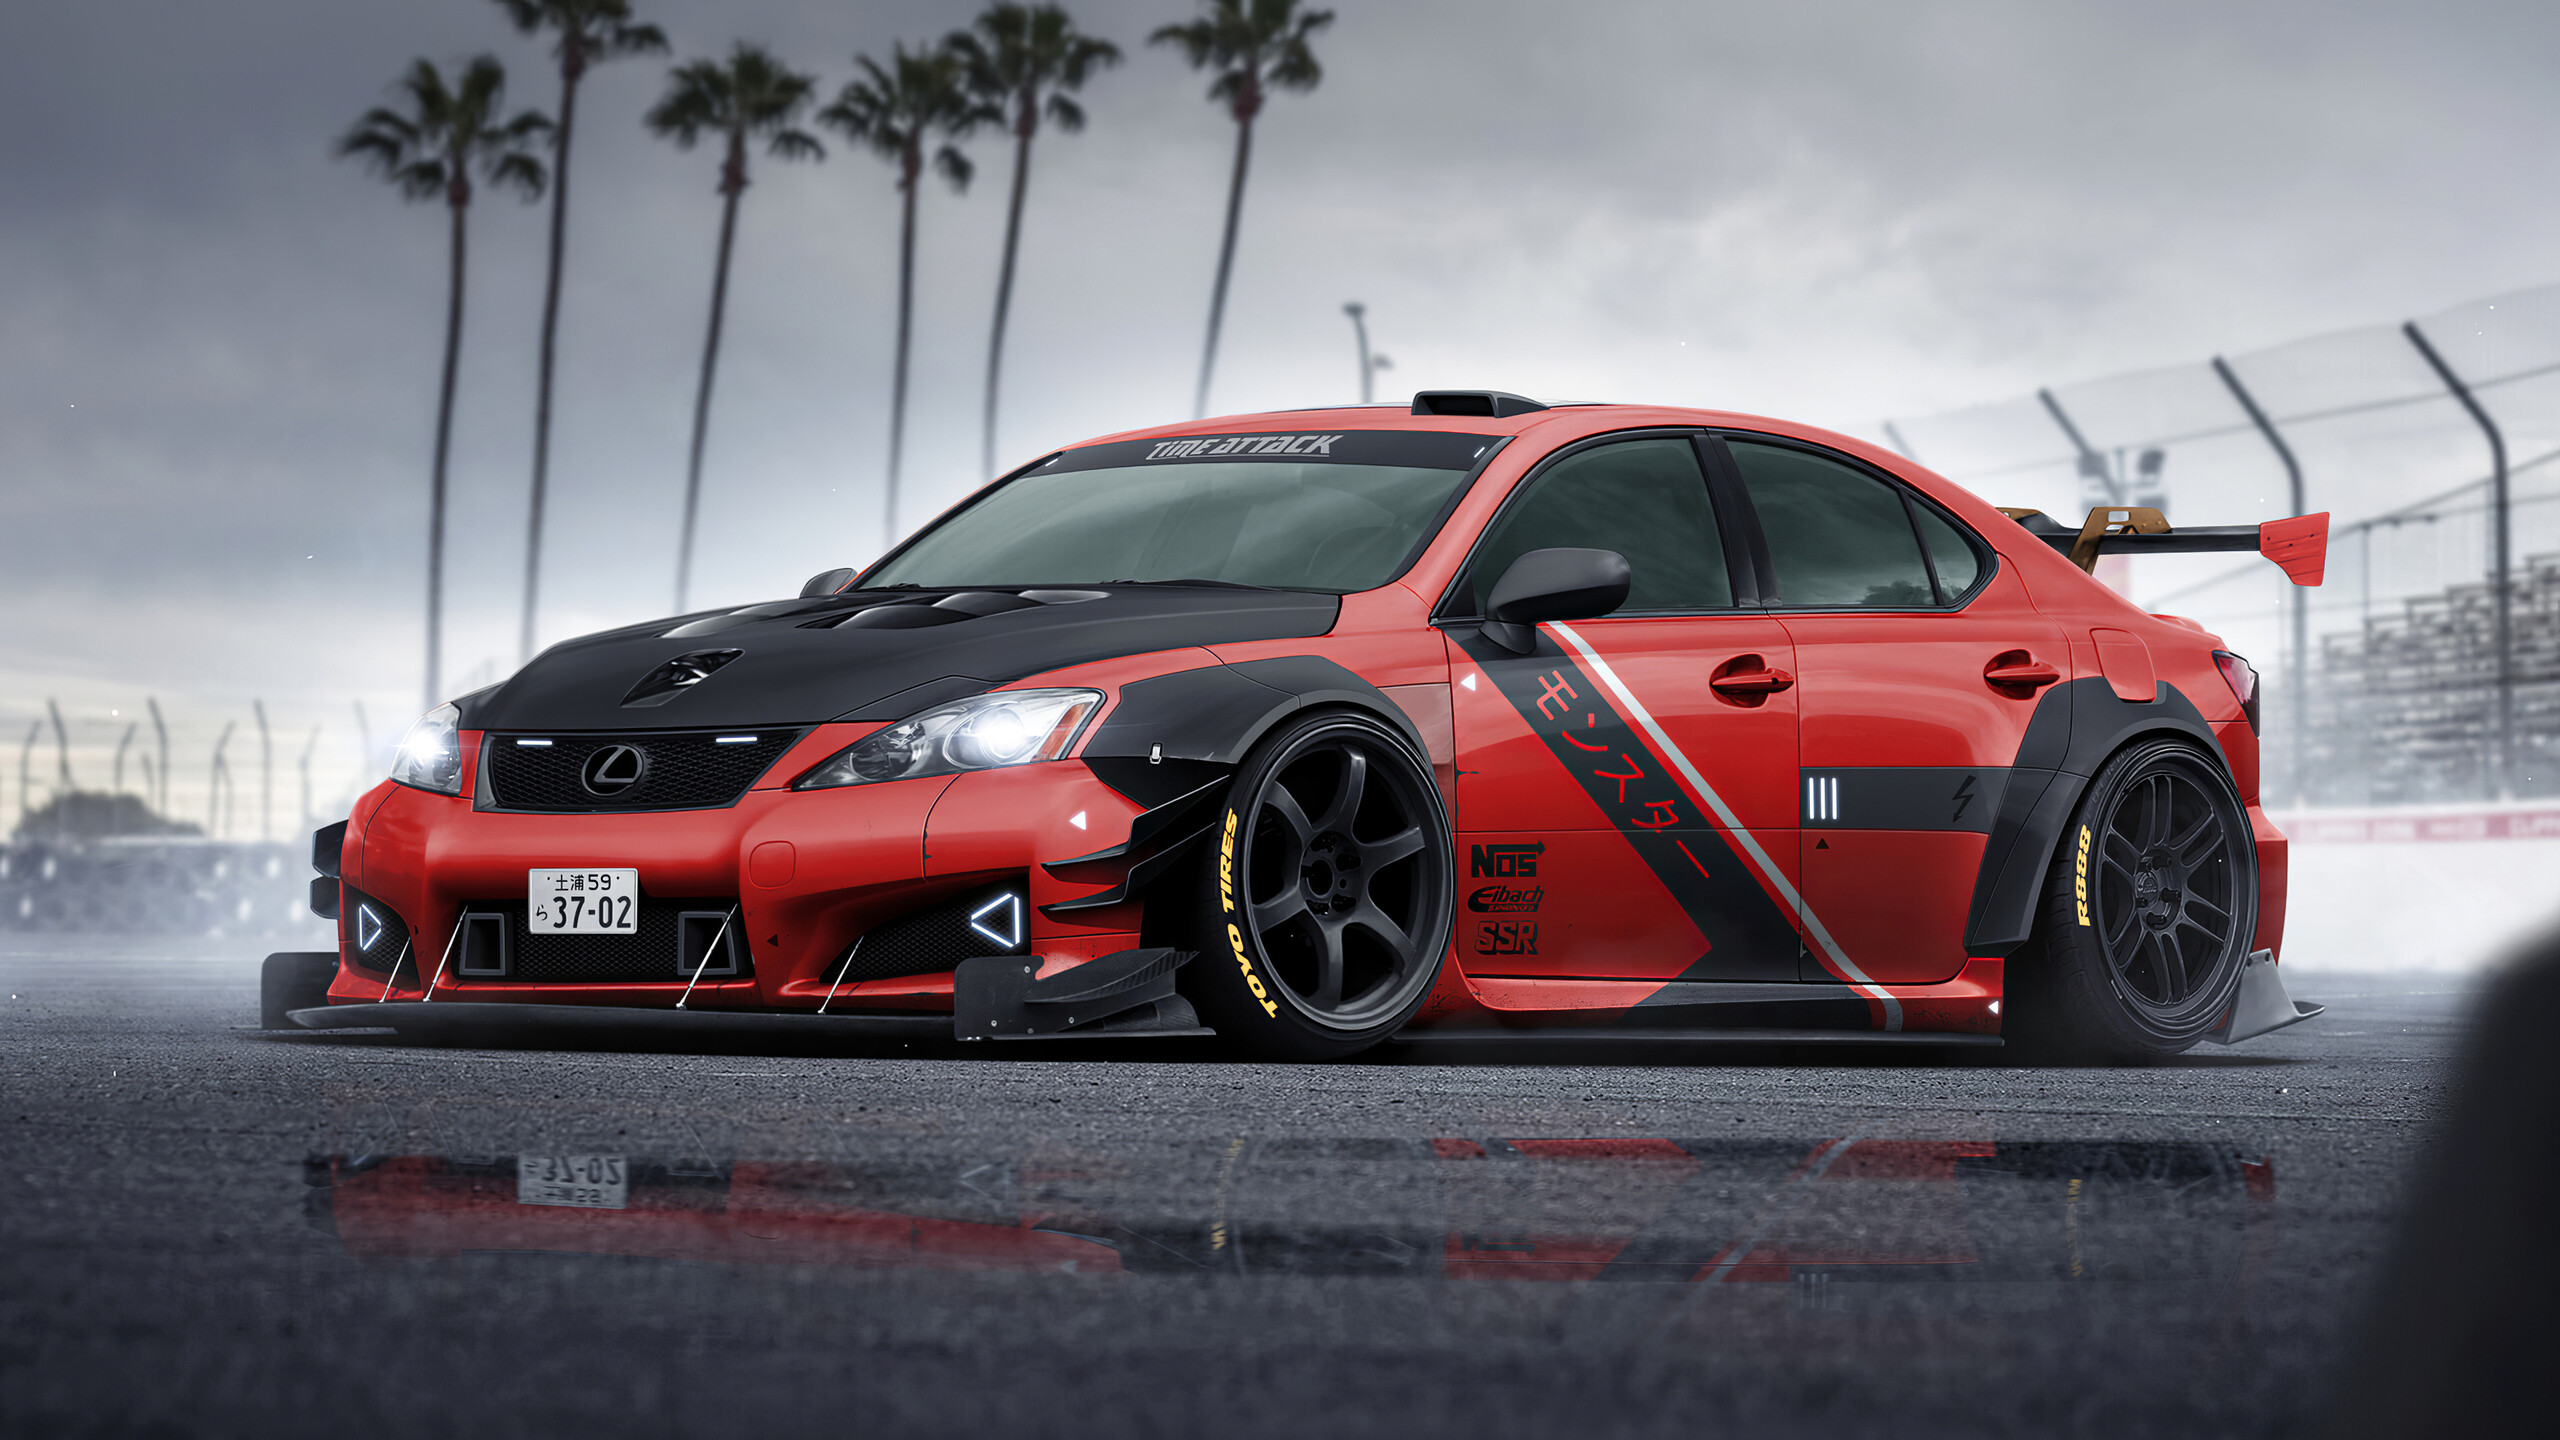 Lexus: Founded in 1989 as the luxury division of Japanese carmaker Toyota, IS F Sport. 2560x1440 HD Wallpaper.